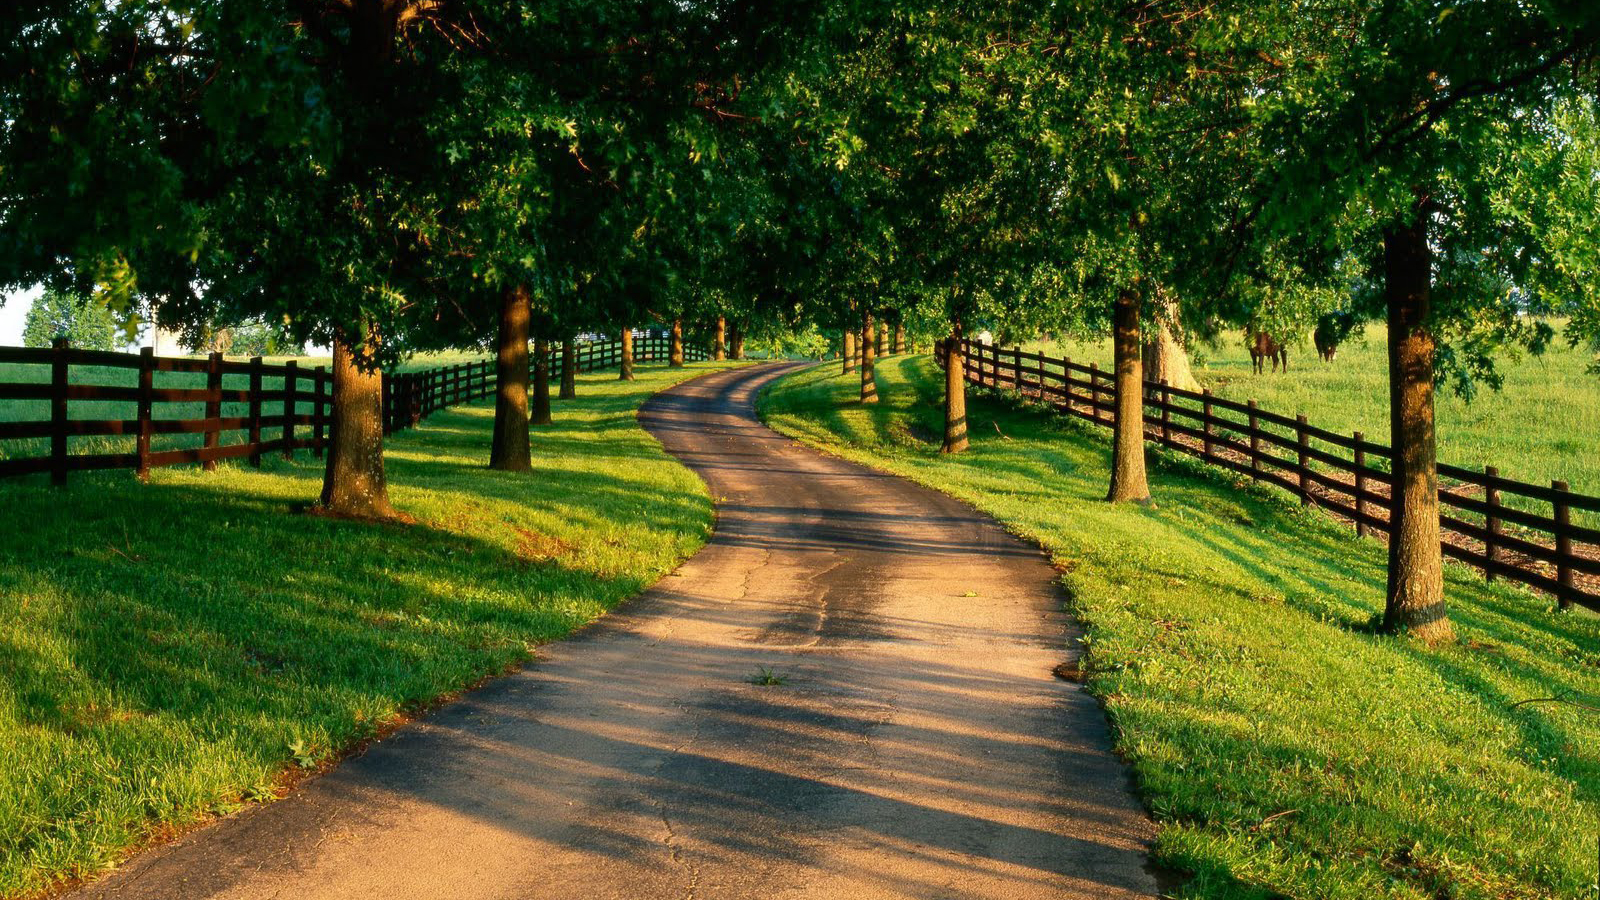 country, man made, road, fence, grass, green, tree